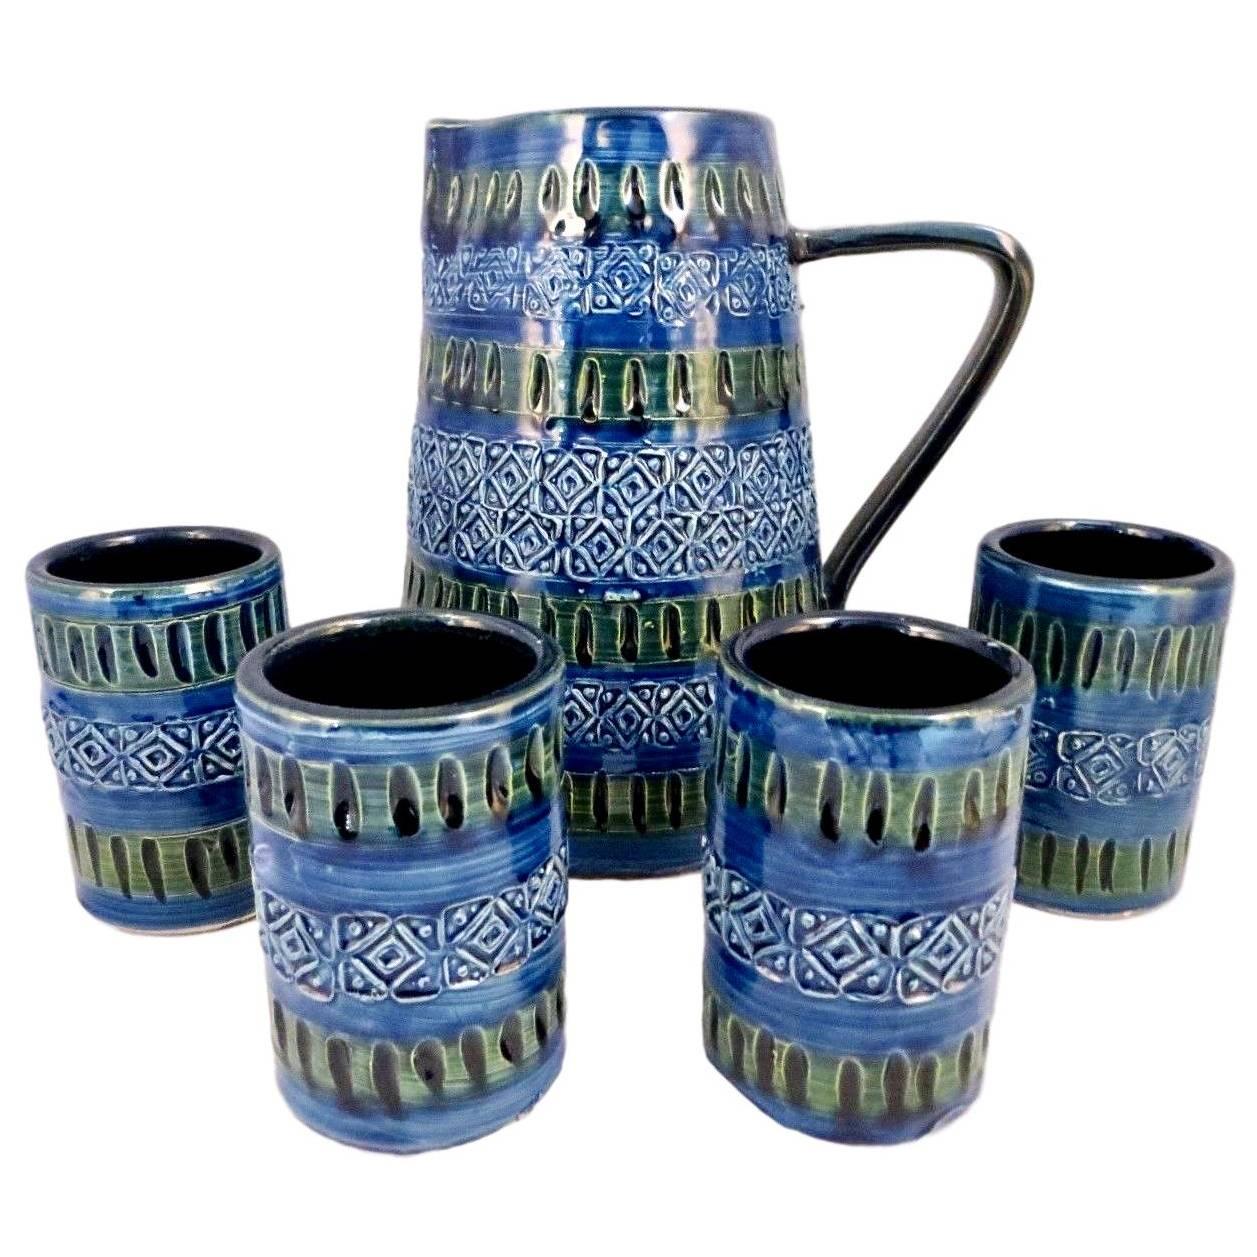 Stunning Italian drinking set by Bitossi. Pitcher and four cups. Marked Italy on underside. Excellent condition. Gorgeous blues and greens. Artwork for your tabletop.

Measures: Pitcher 8 H x 7.5 D

Tumblers 3.75 H x 2.5 D